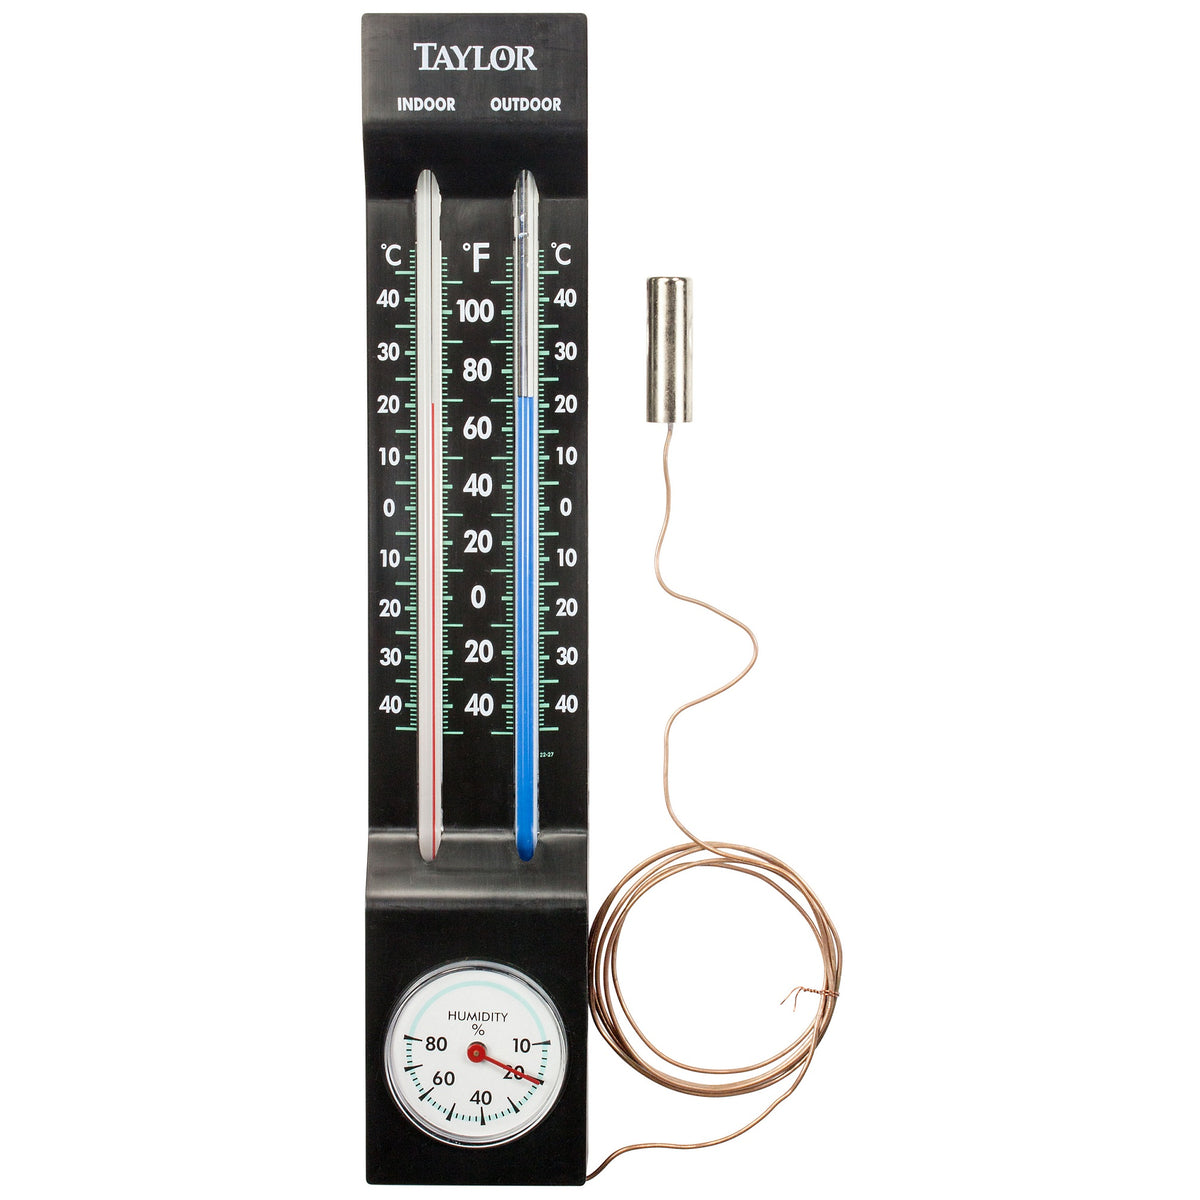 buy outdoor thermometers at cheap rate in bulk. wholesale & retail outdoor playground & pool items store.